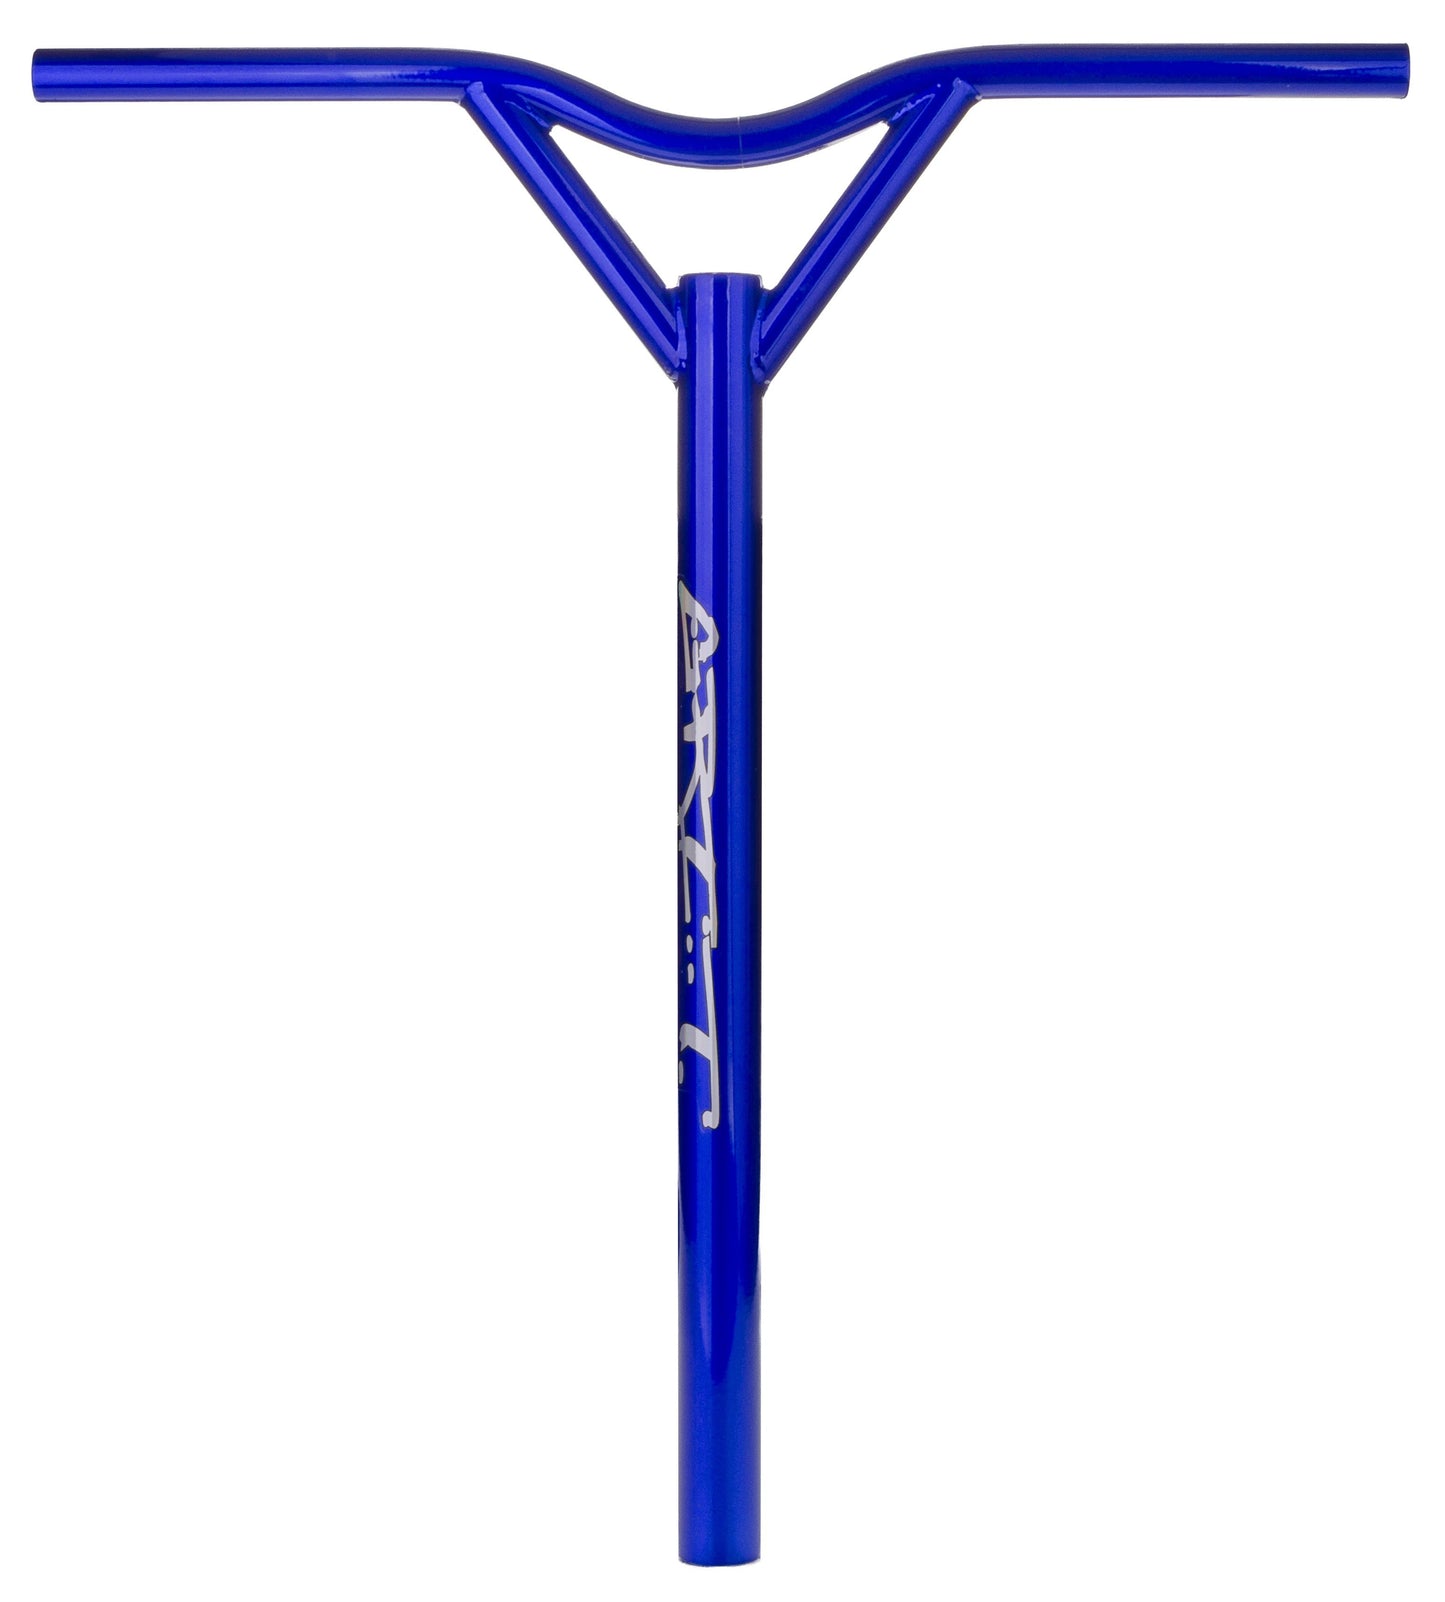 Grit Yeh Yeh Yeh V2 Bars - HIC - 600mm - Blue